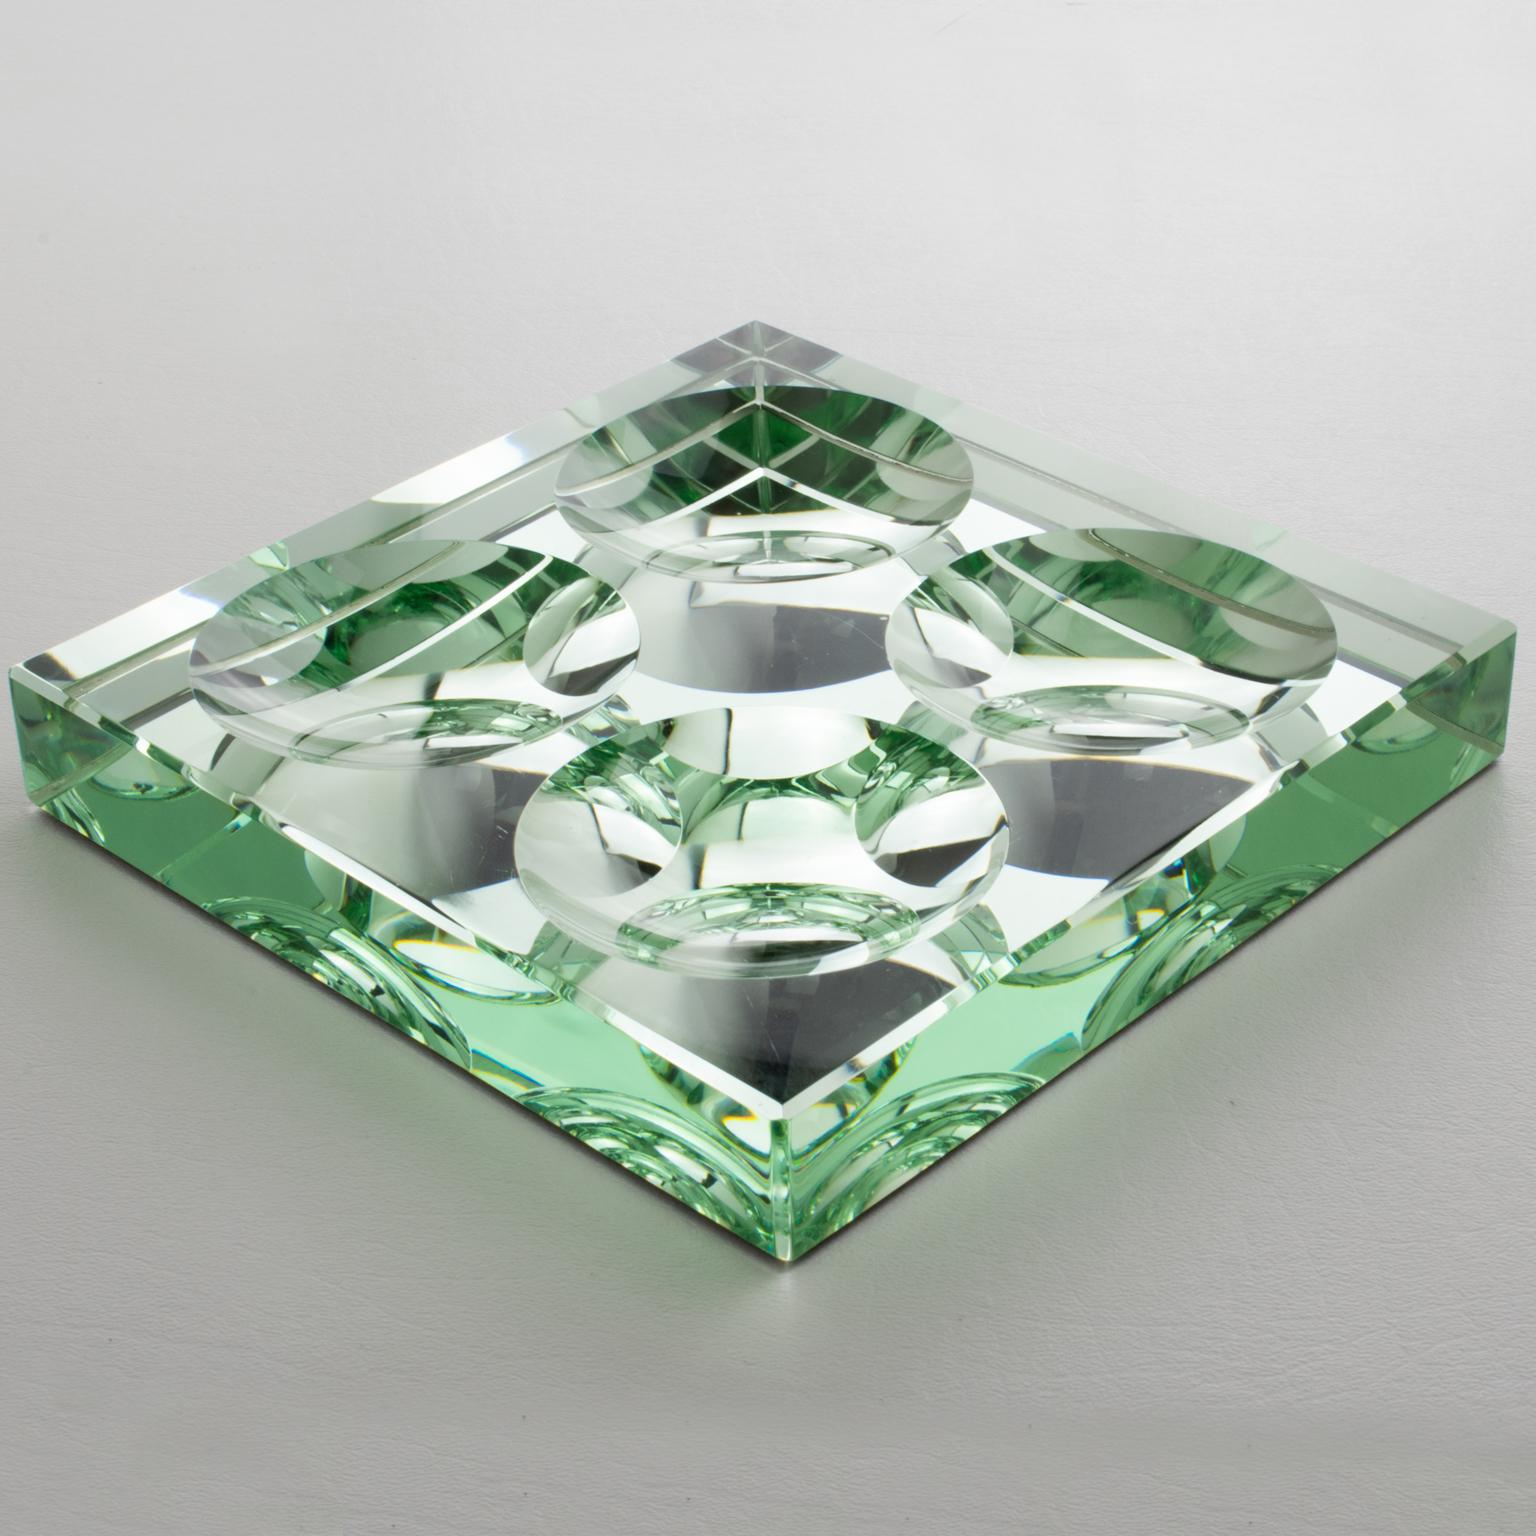 French designer Jean Luce (1895 - 1964) created this stunning French Art Deco mirrored glass desk tidy, vide poche or decorative centerpiece. This catchall features an extra thick transparent glass slab with a mirror finish underside. The design